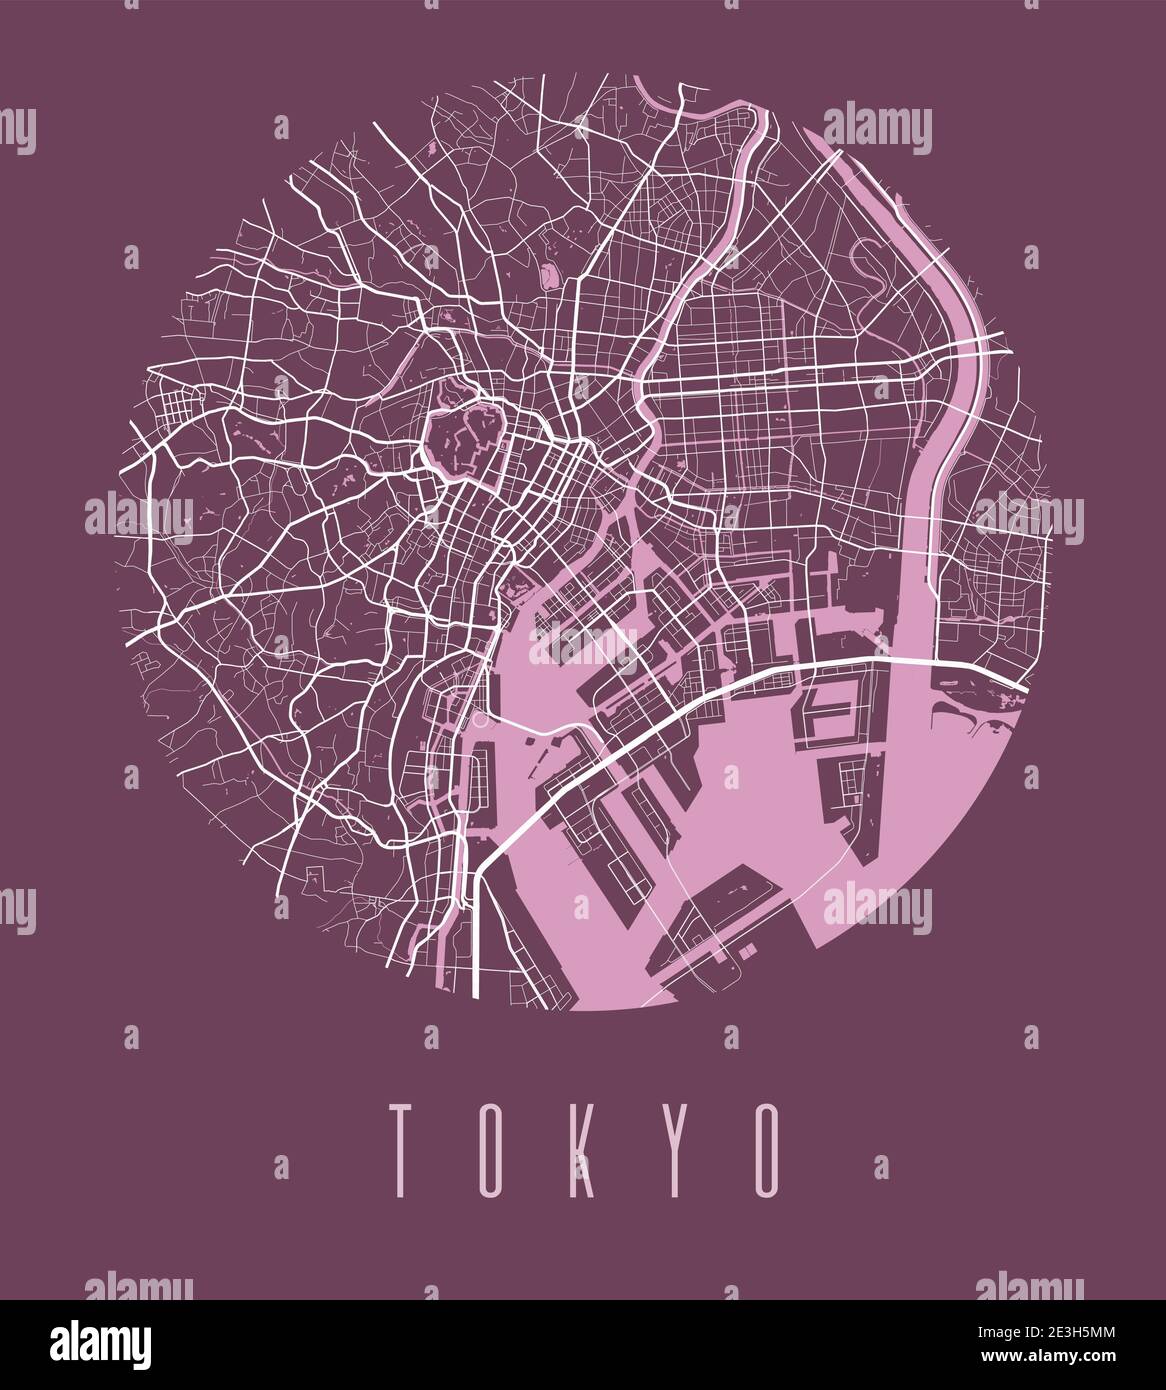 tokyo-map-poster-decorative-design-street-map-of-tokyo-city-cityscape-aria-panorama-silhouette